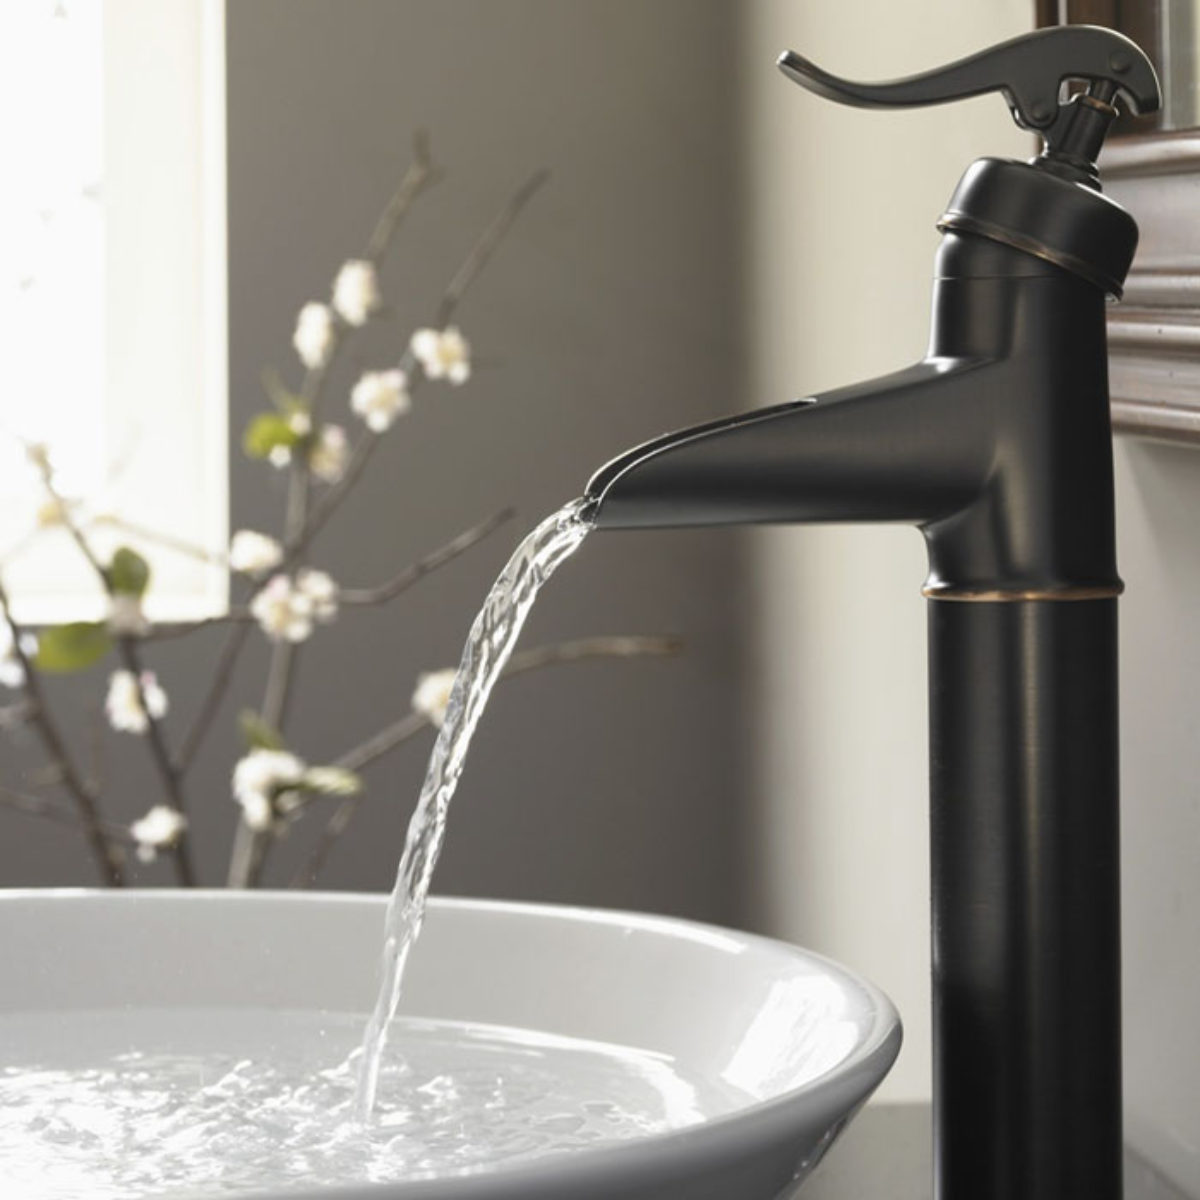 15 Useful And Cheap Faucets For Bathroom Under 50